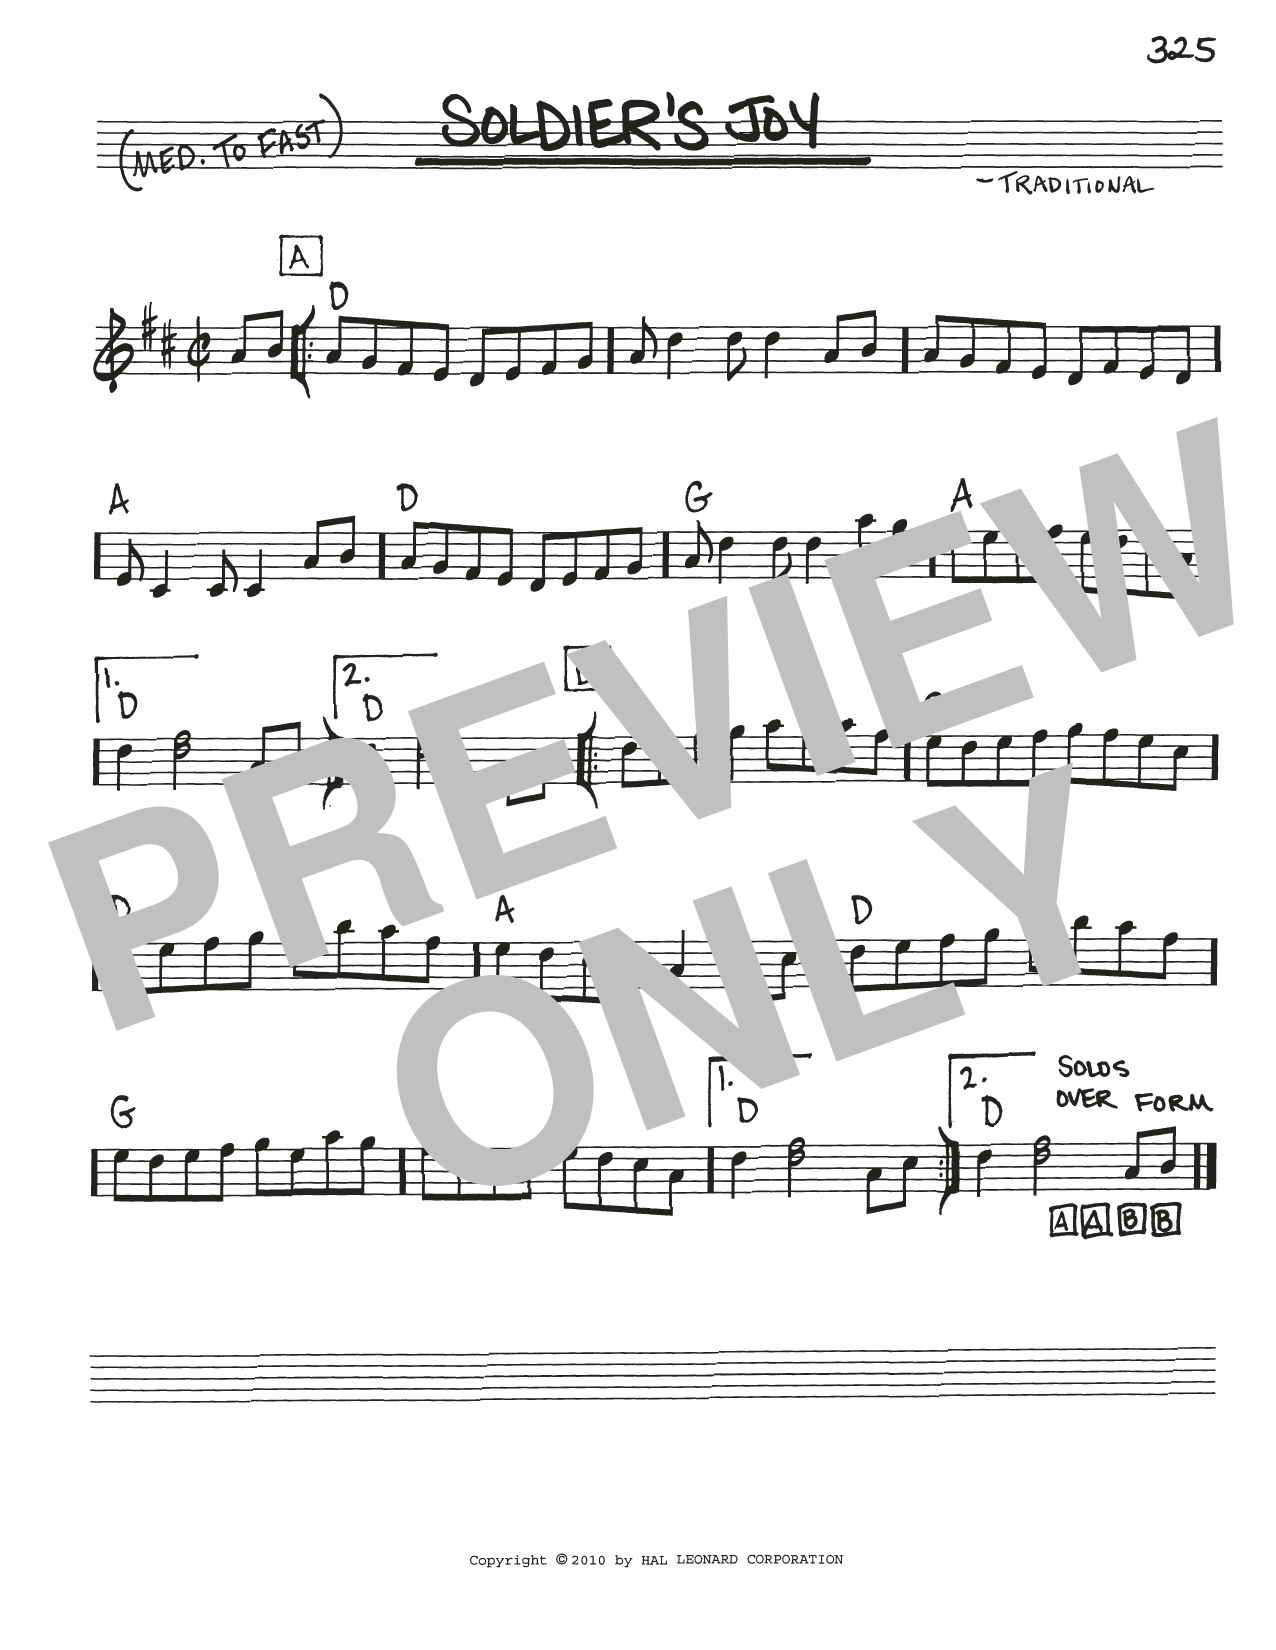 Download Traditional Soldier's Joy Sheet Music